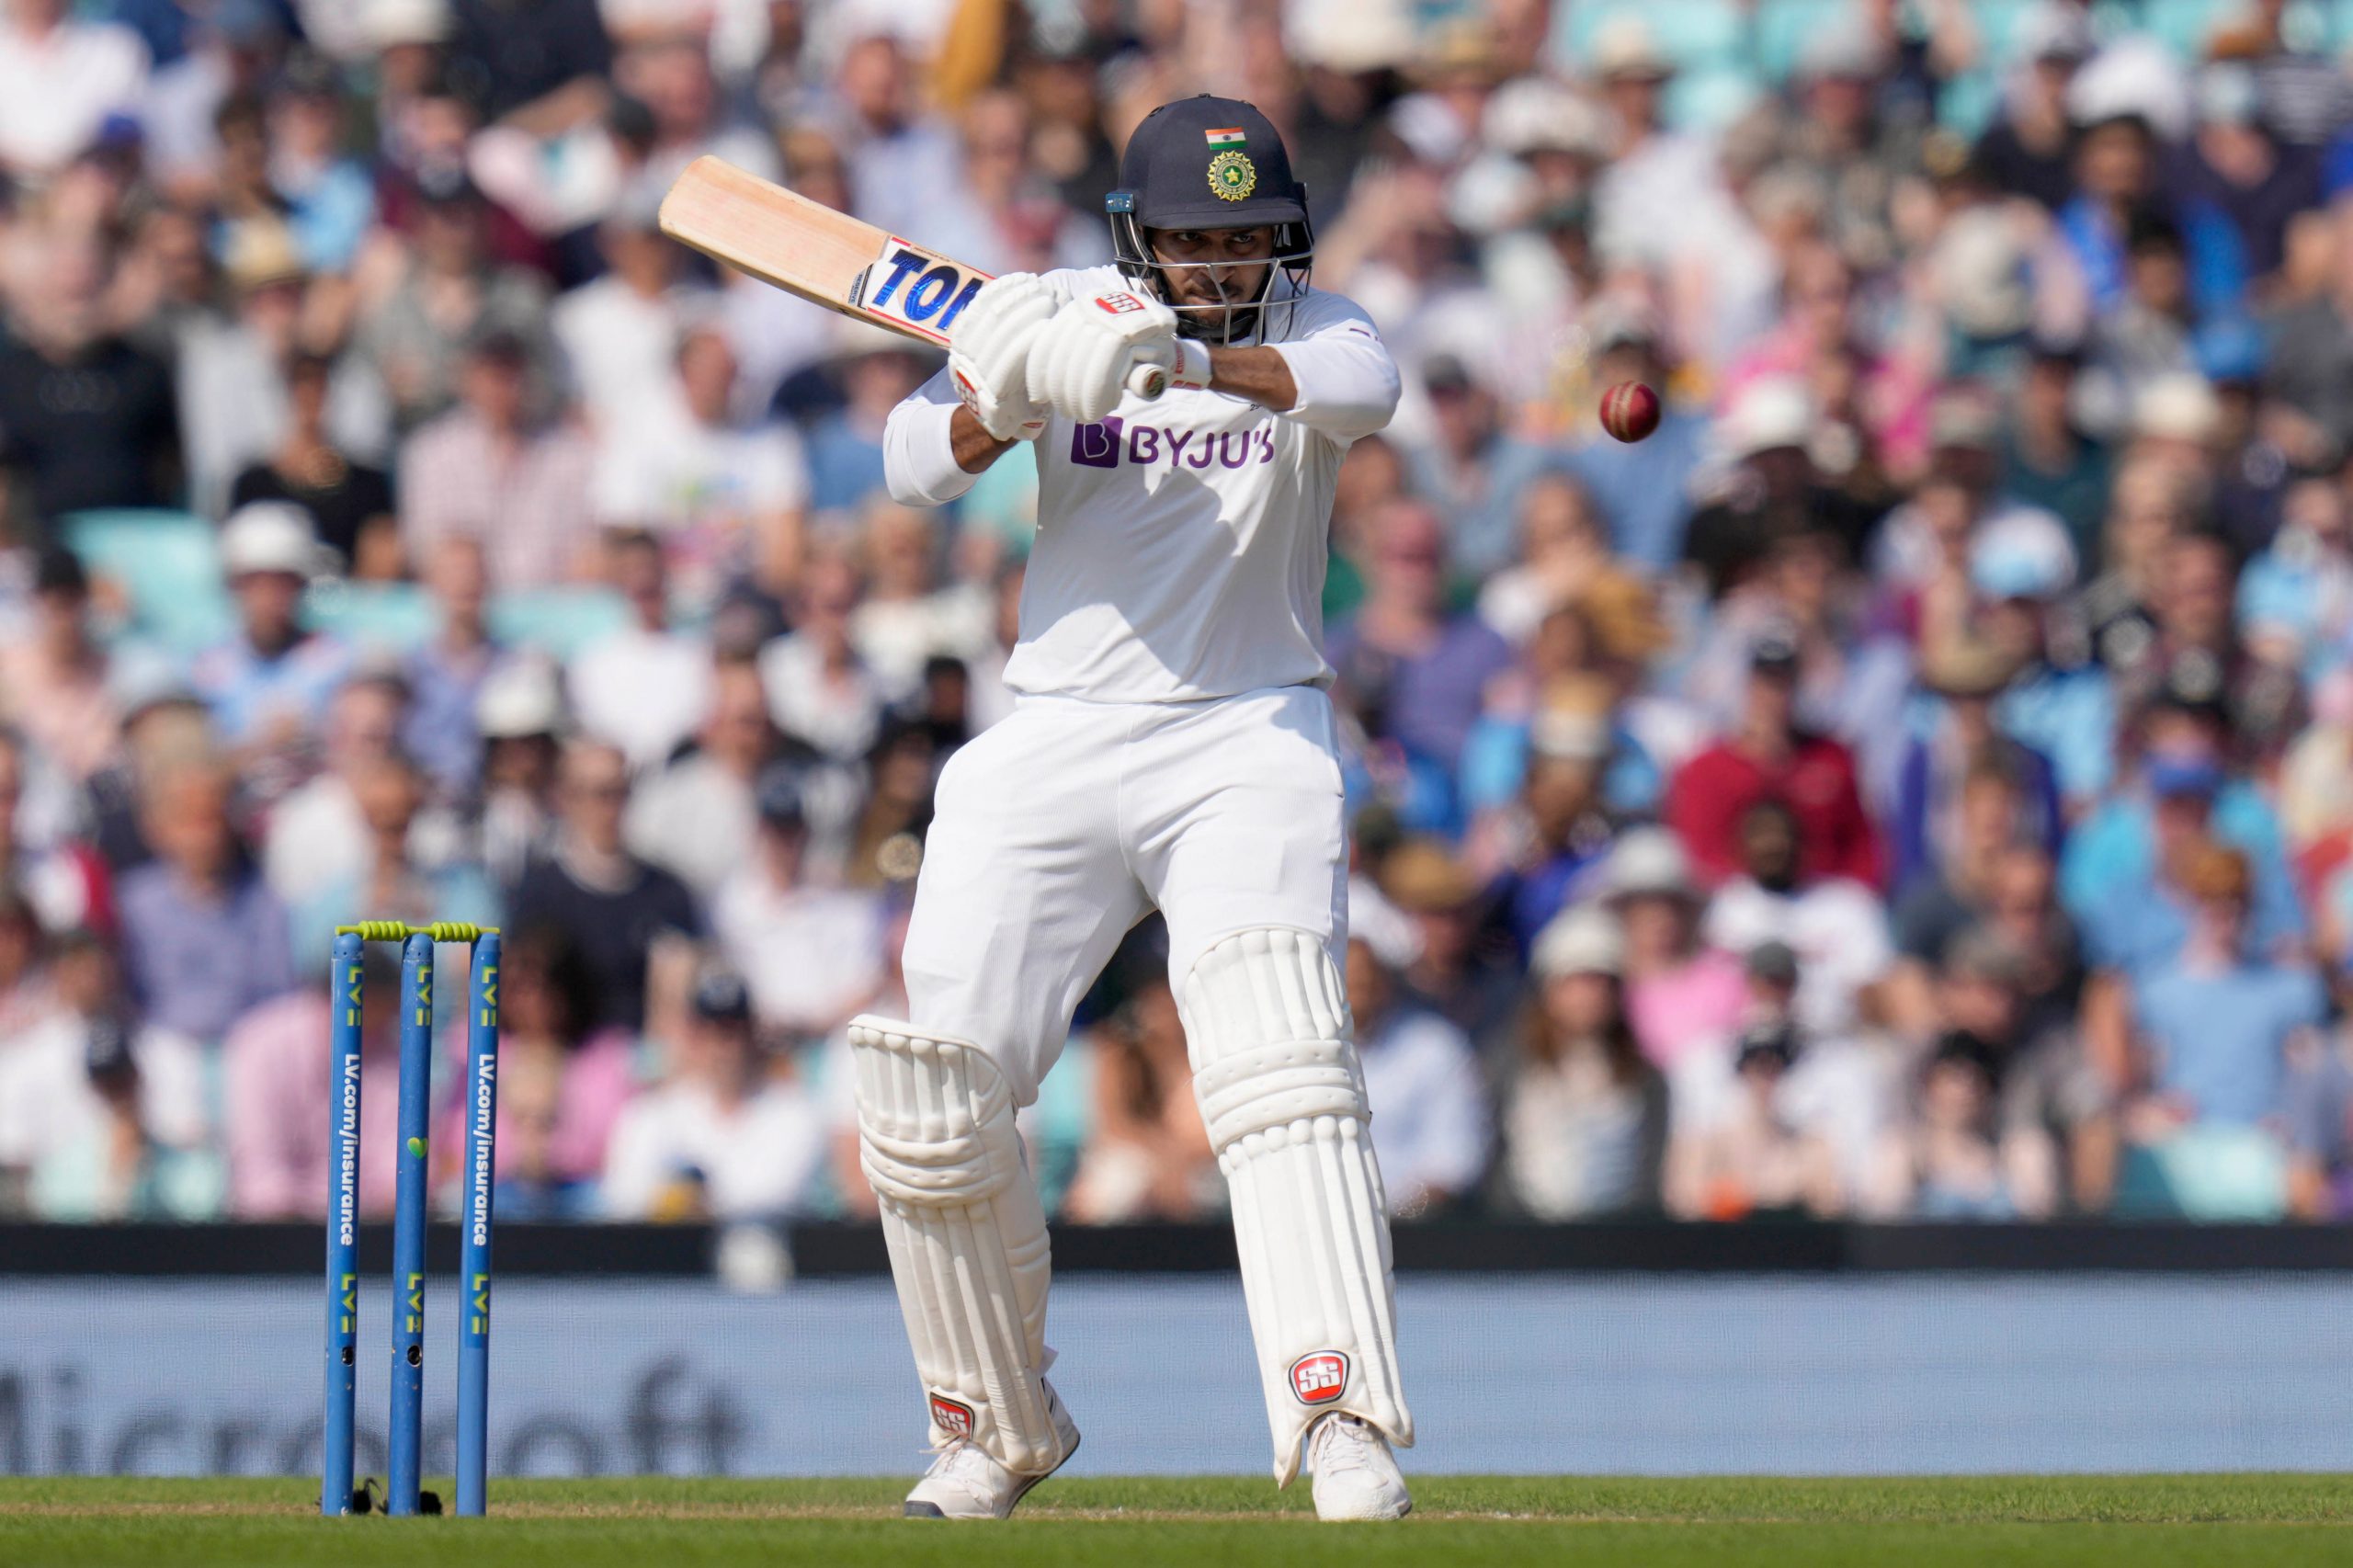 India vs ENG 4th Test: Shardul Thakur smashes another half century